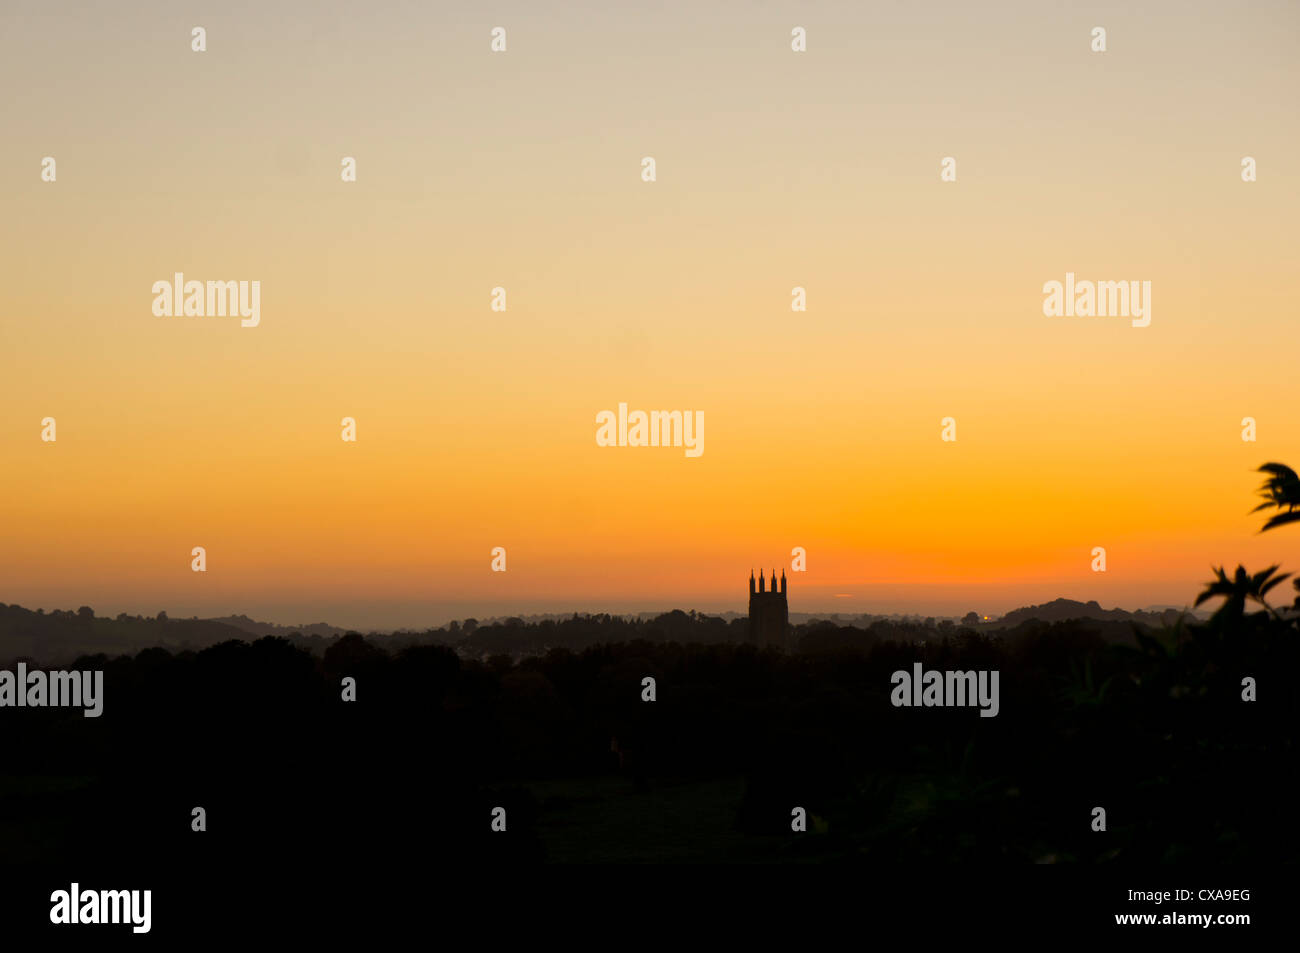 St Cuthbert's Church, Wells, Somerset seen from a distance at sunset. The church used for the village fete in the movie Hot Fuzz Stock Photo